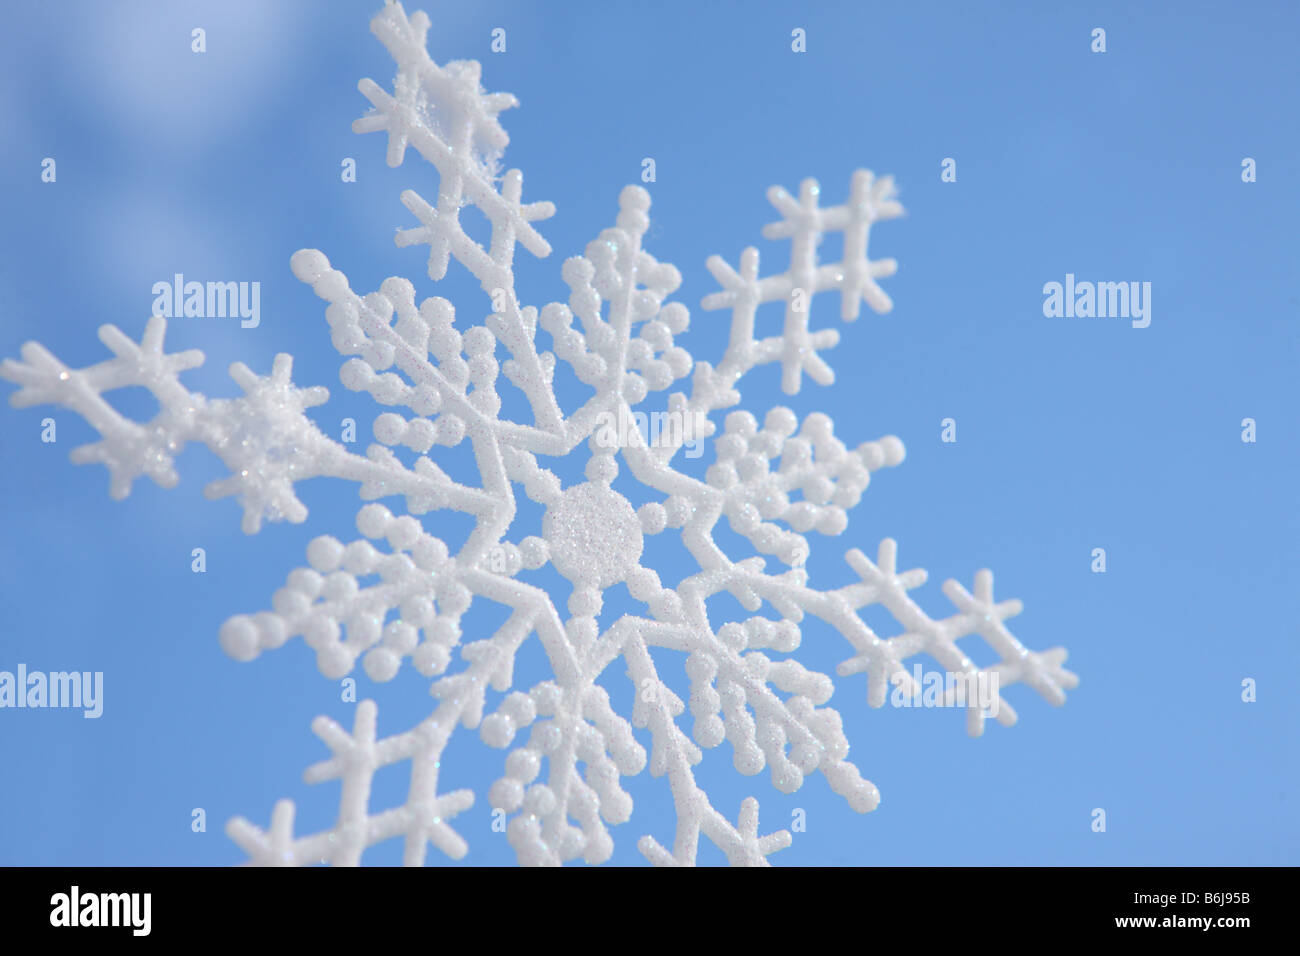 Snowflake ornament against blue winter sky Stock Photo